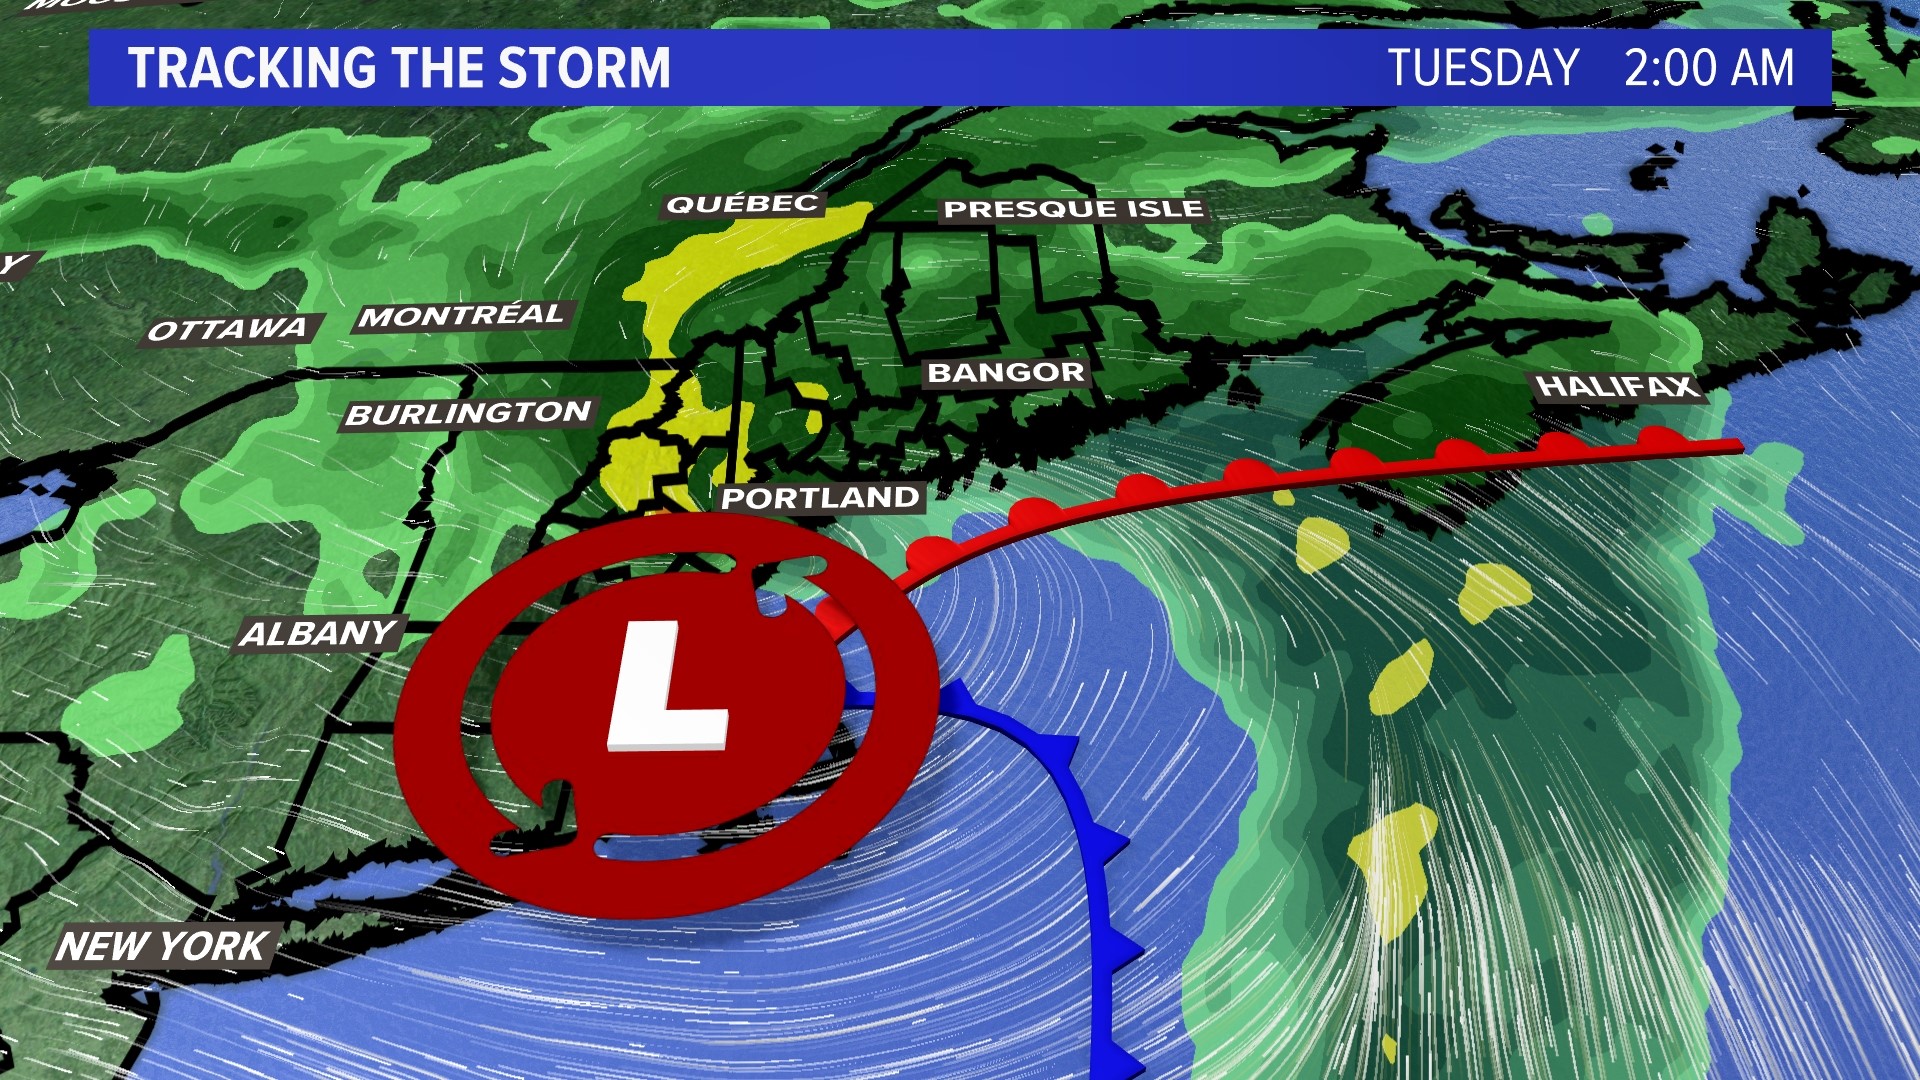 NEWS CENTER Maine meteorologist Jason Nappi explains why the next storm to hit Maine won't be a major by Maine standards, but it will still pack a punch.